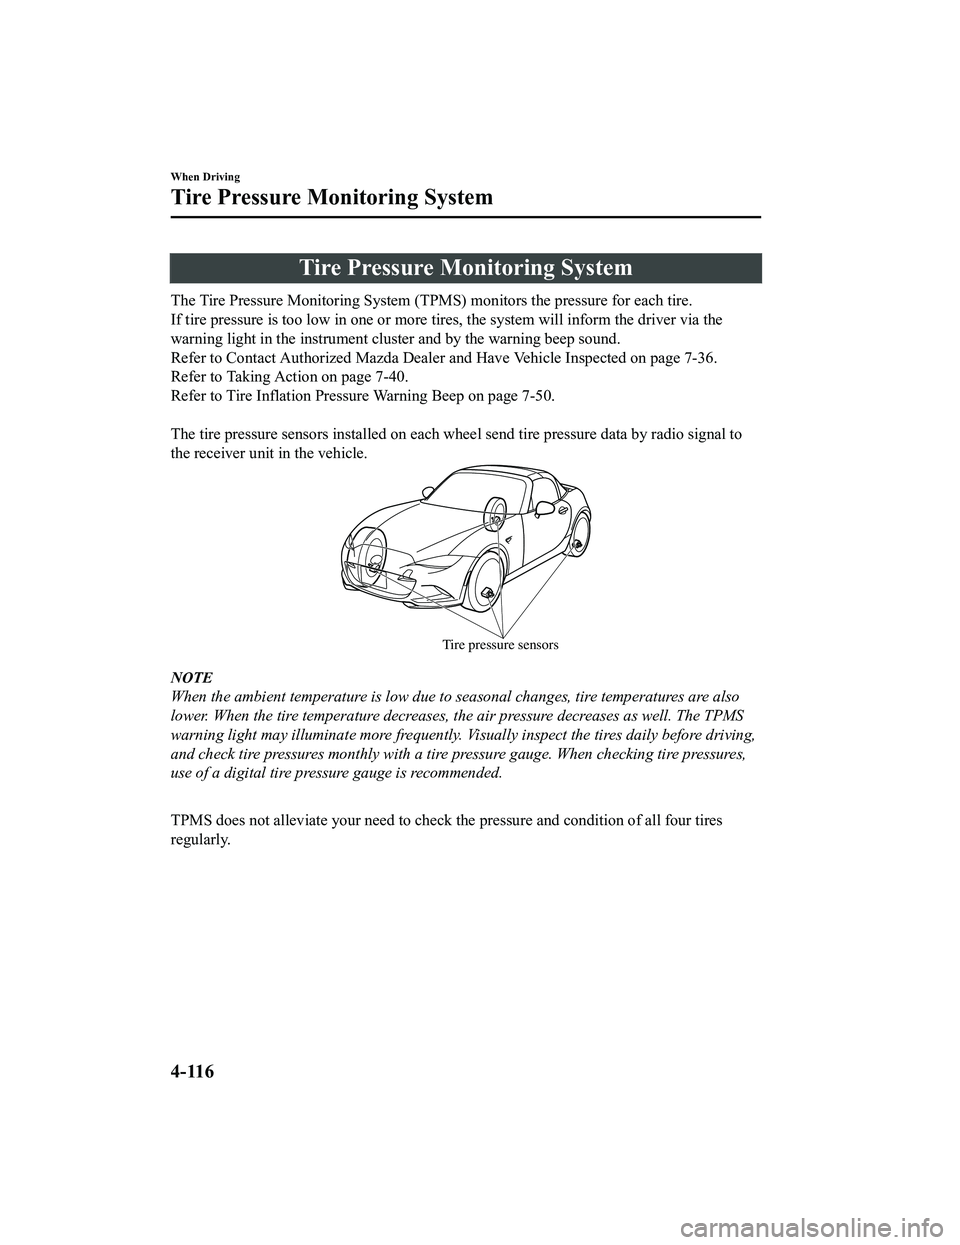 MAZDA MODEL MX-5 MIATA RF 2020  Owners Manual Tire Pressure Monitoring System
The Tire Pressure Monitoring System (TPMS) monitors the pressure for each tire.
If tire pressure is to o low in one or more  tires, the system will inform the driver vi